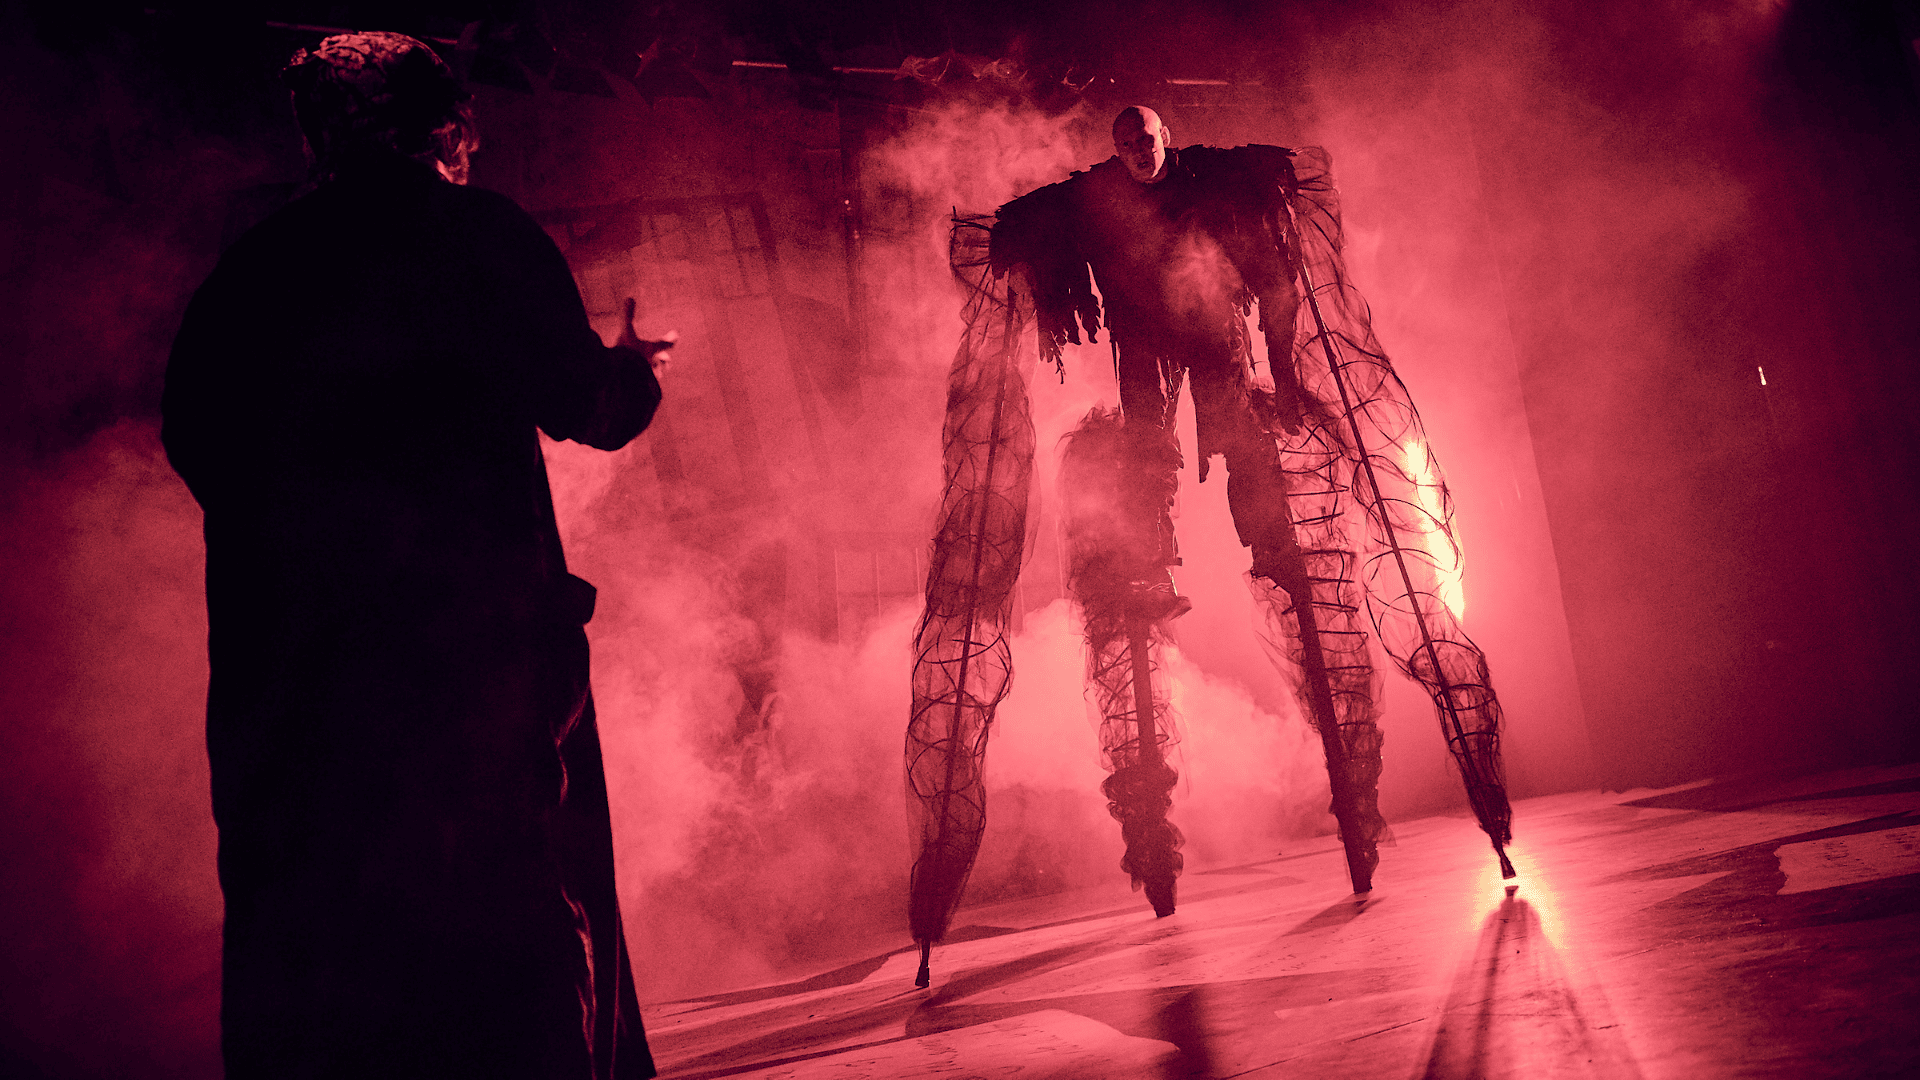 Christmas Carol production shot: An actor on stilts creates a look of a large ghostly monster. Smoke and red lighting fills the image